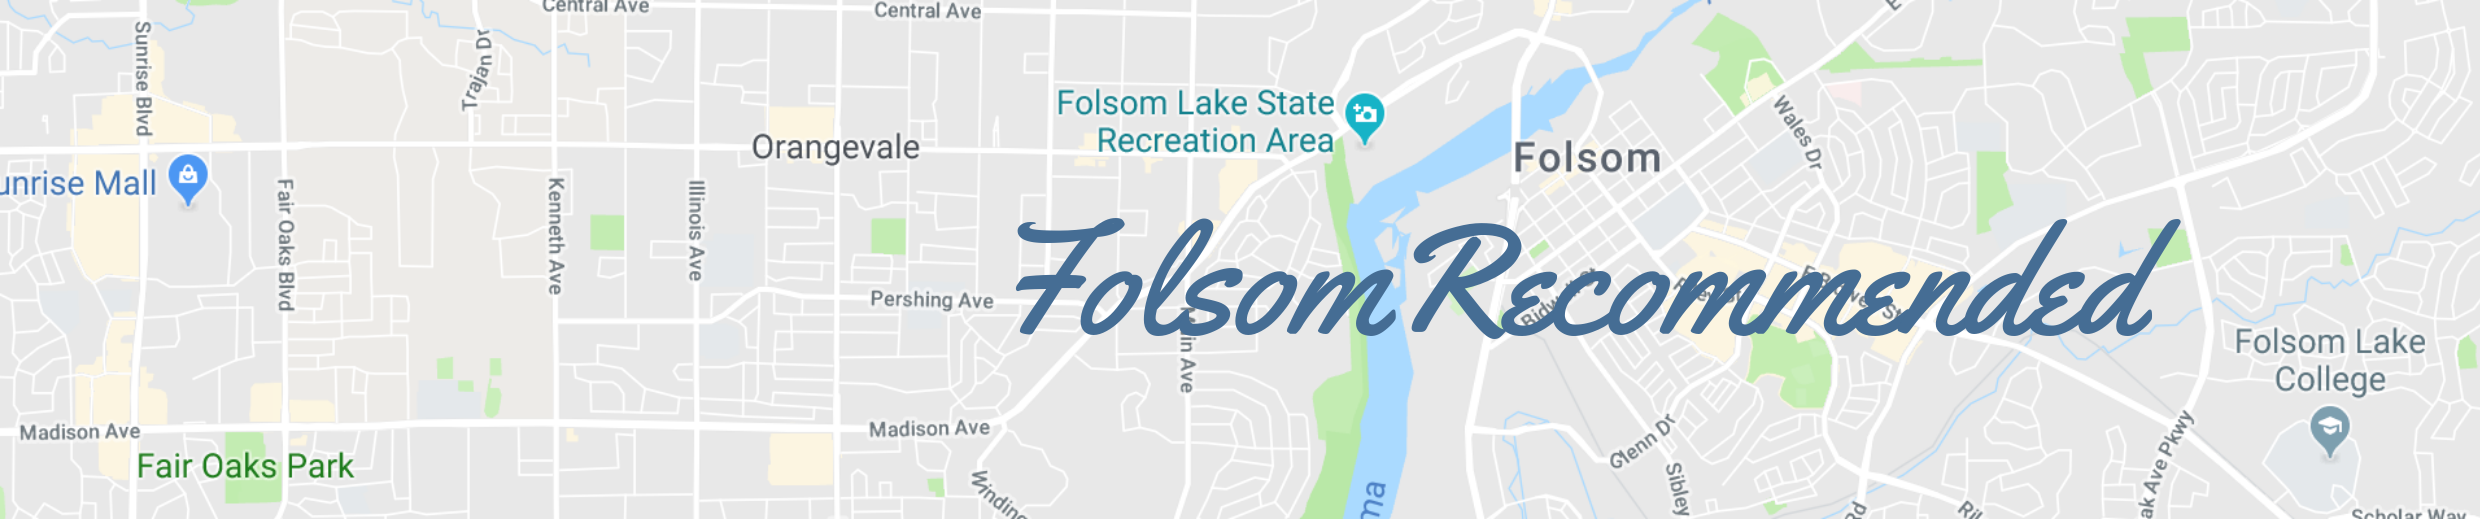 Folsom Recommended